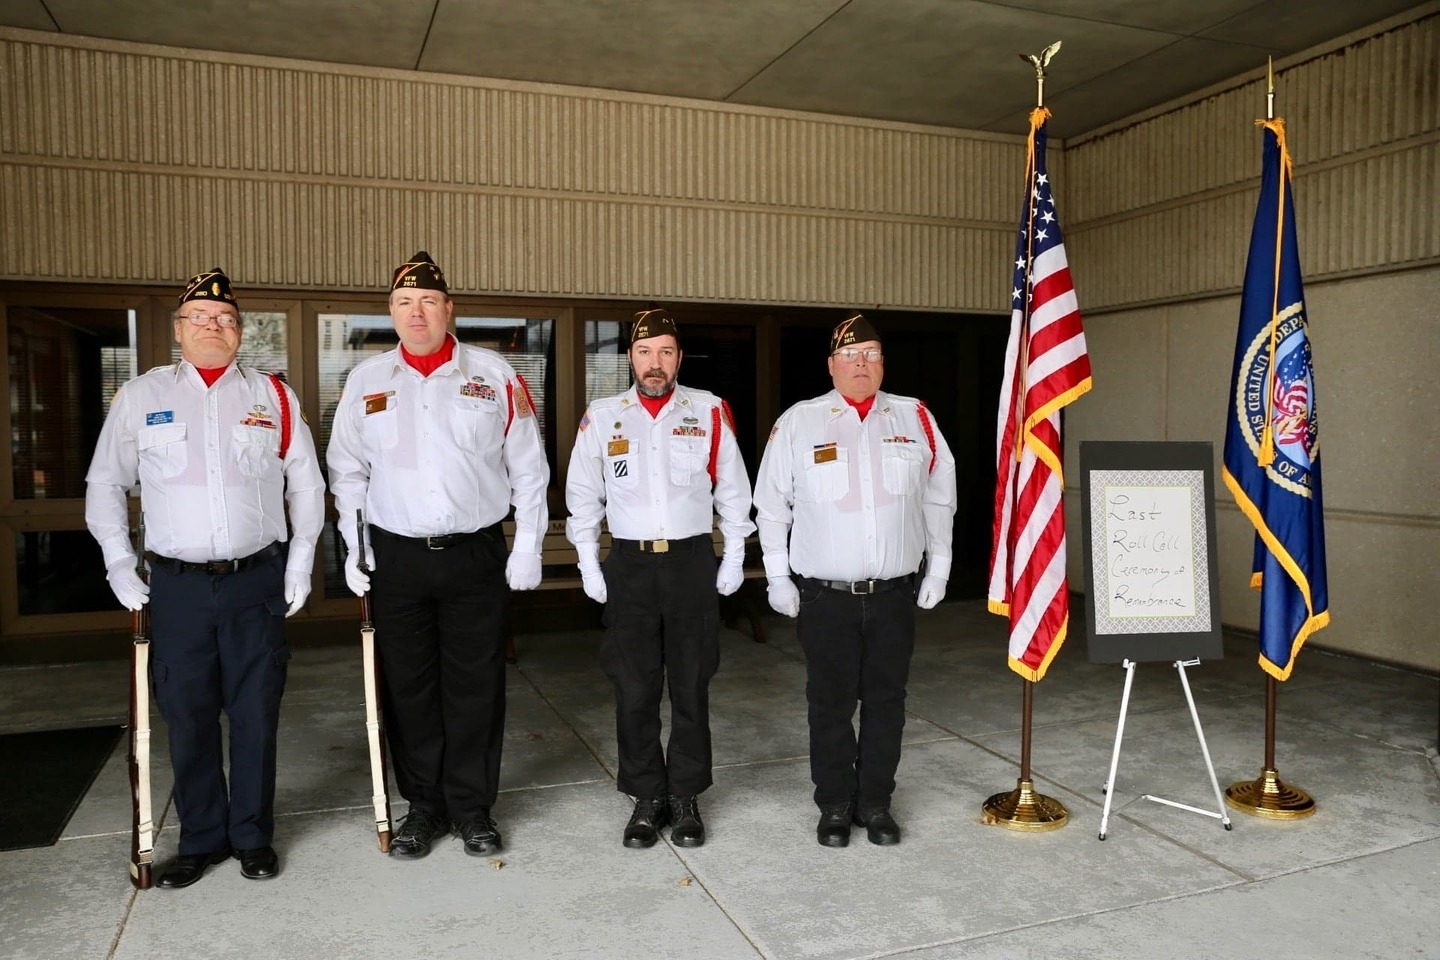 Members of the Benton American Legion Post 280/VFW Post 2671 Honor Guard were invited to participate in the Last Call Ceremony held at the Marion VA Hospital's Community Living Center. Our Honor Guard had the honor of posting the Colors for this hallowed event which honors the Veteran's who had passed during the last few months. 